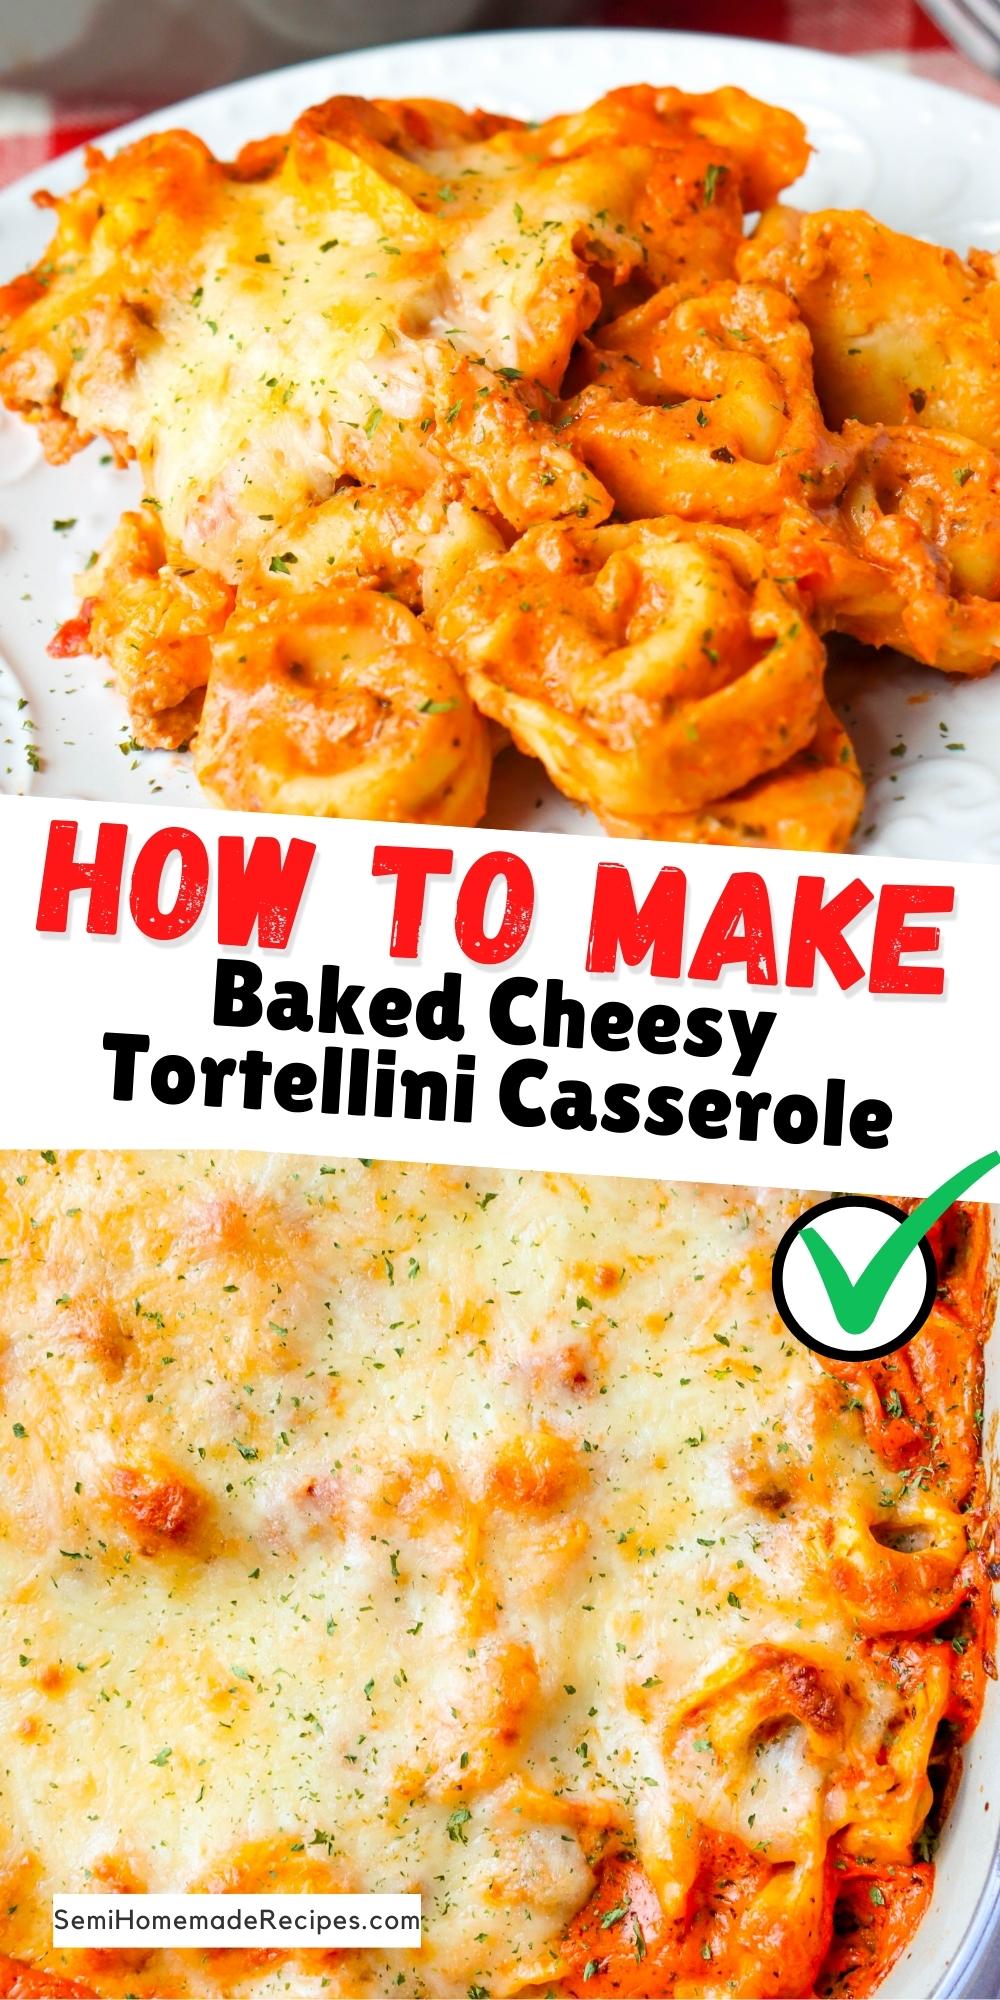 Baked Cheesy Tortellini Casserole - Ground Turkey (or ground beef), is seasoned and browned before being mixed together with spaghetti sauce, cream cheese and cheesy tortellini before being covered in cheese and baked in the oven. 